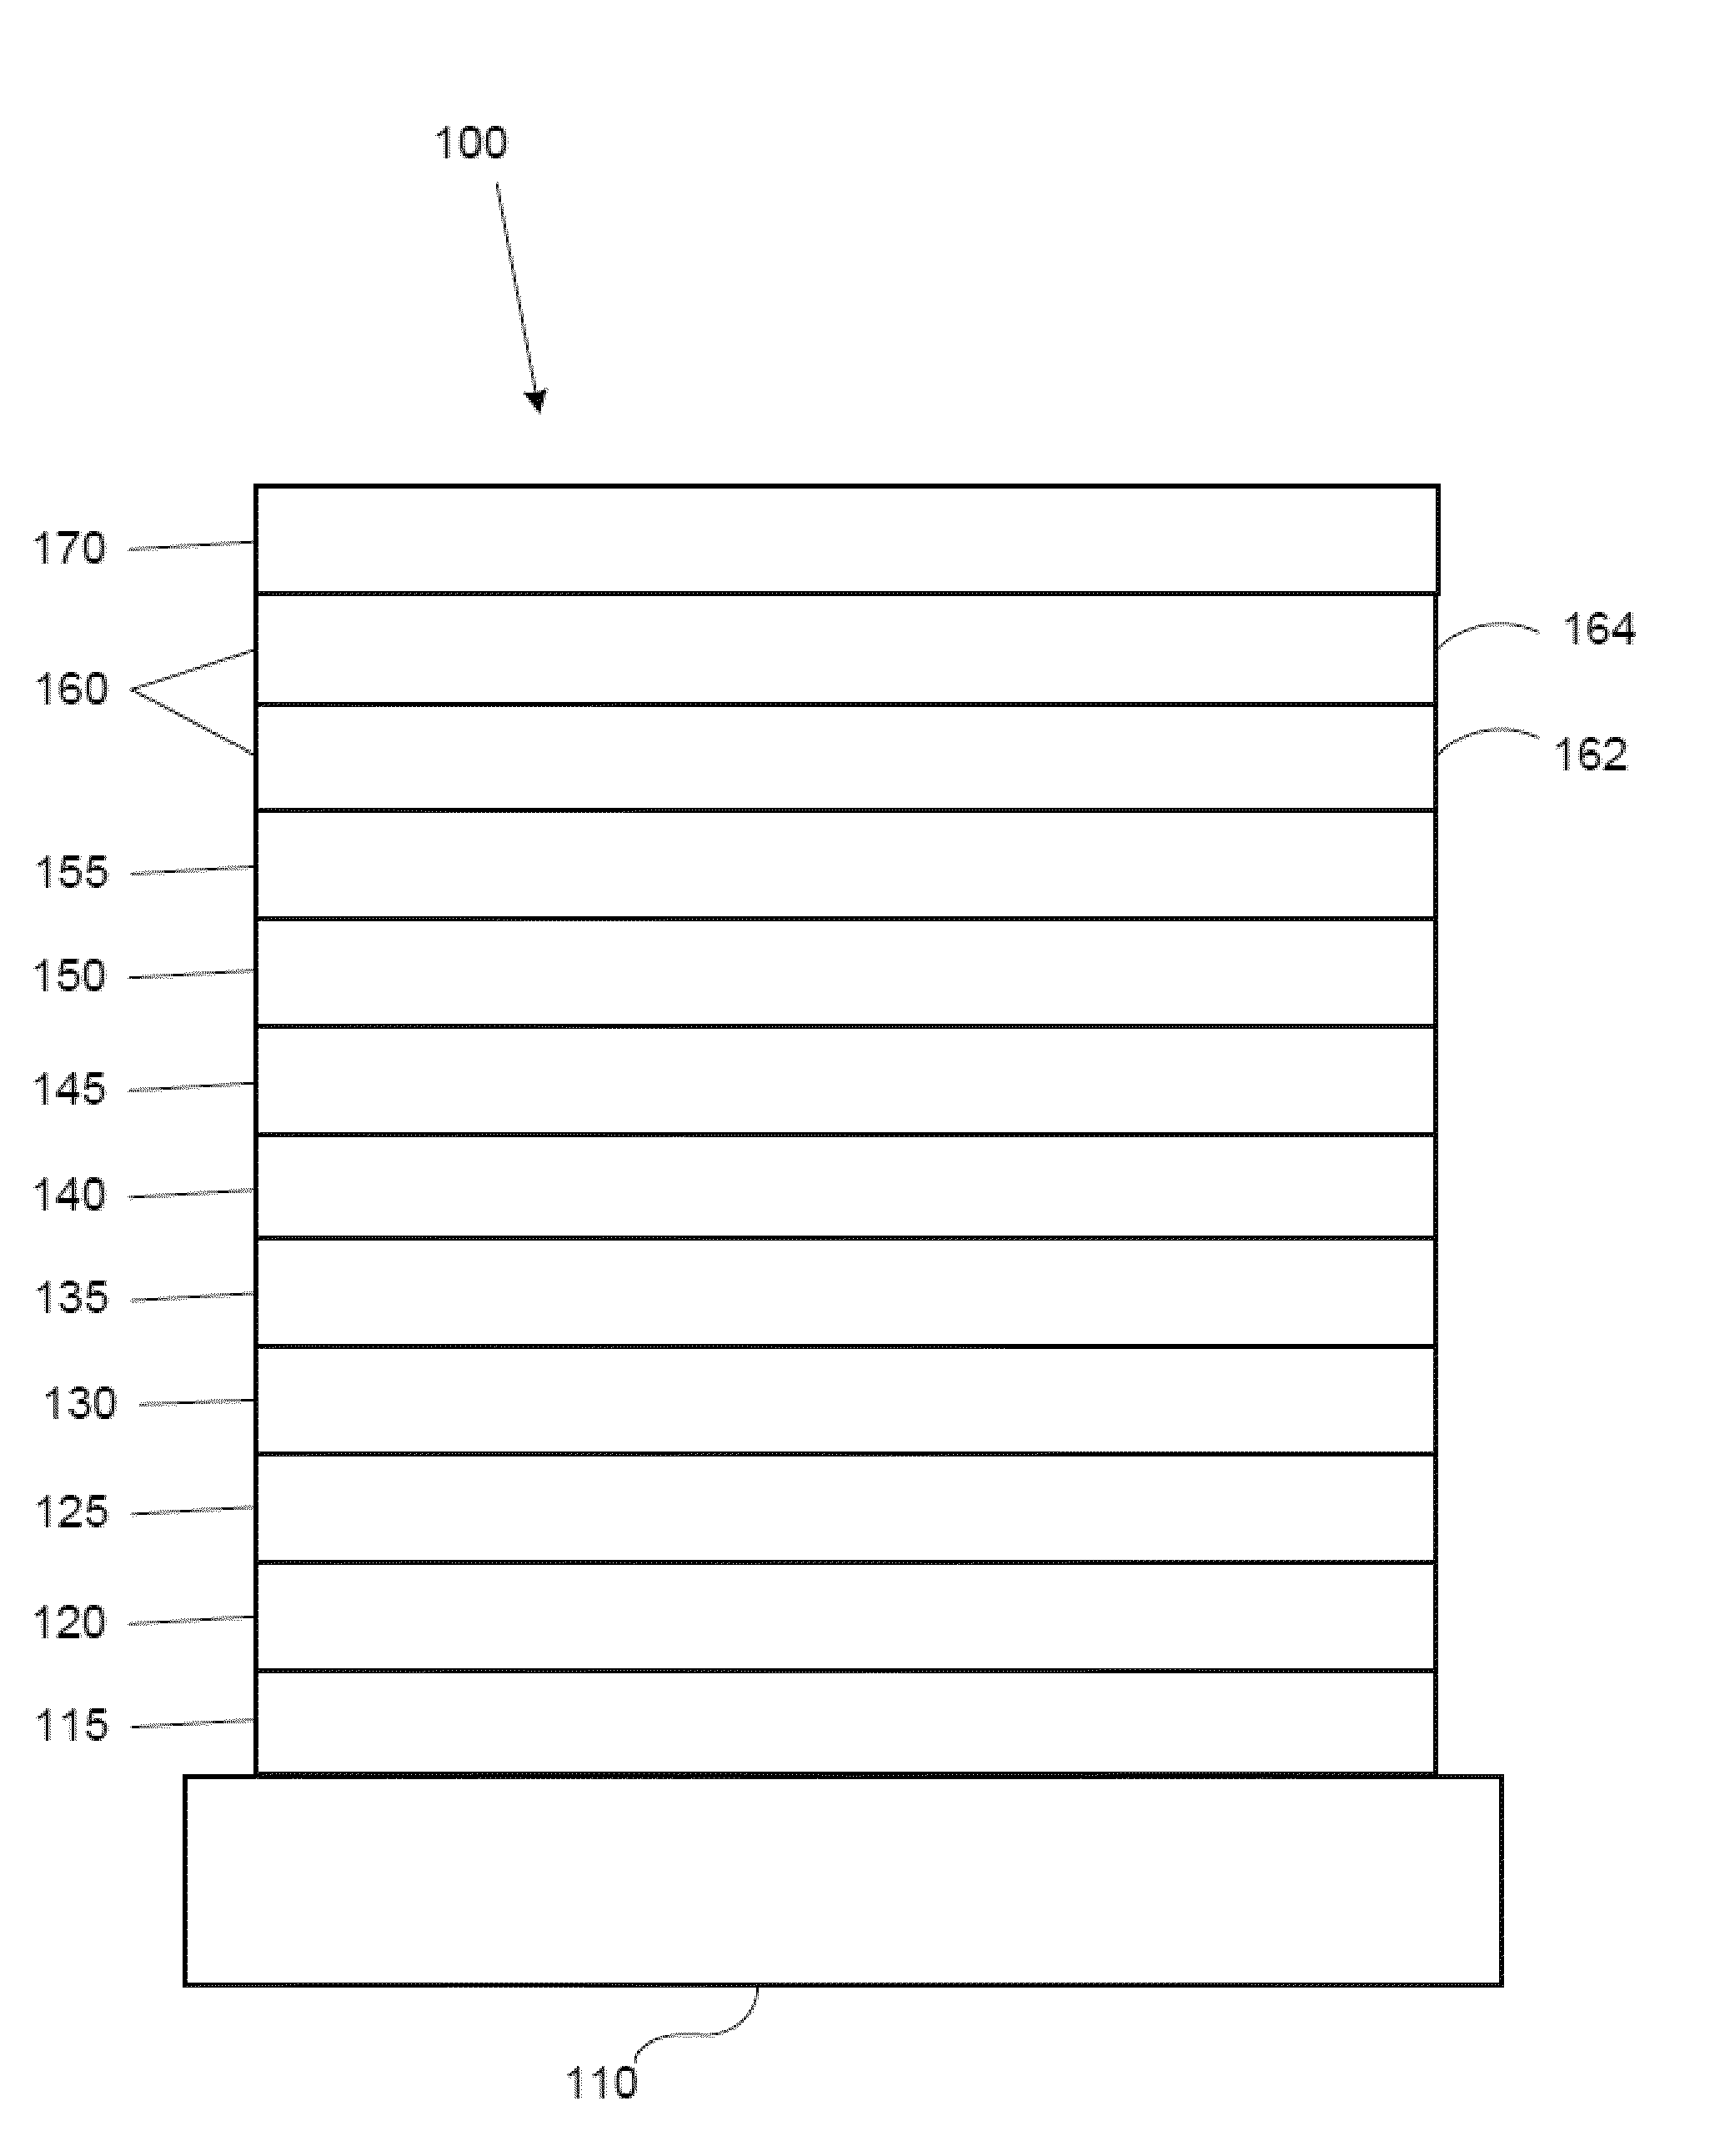 Systems and methods of modulating flow during vapor jet deposition of organic materials